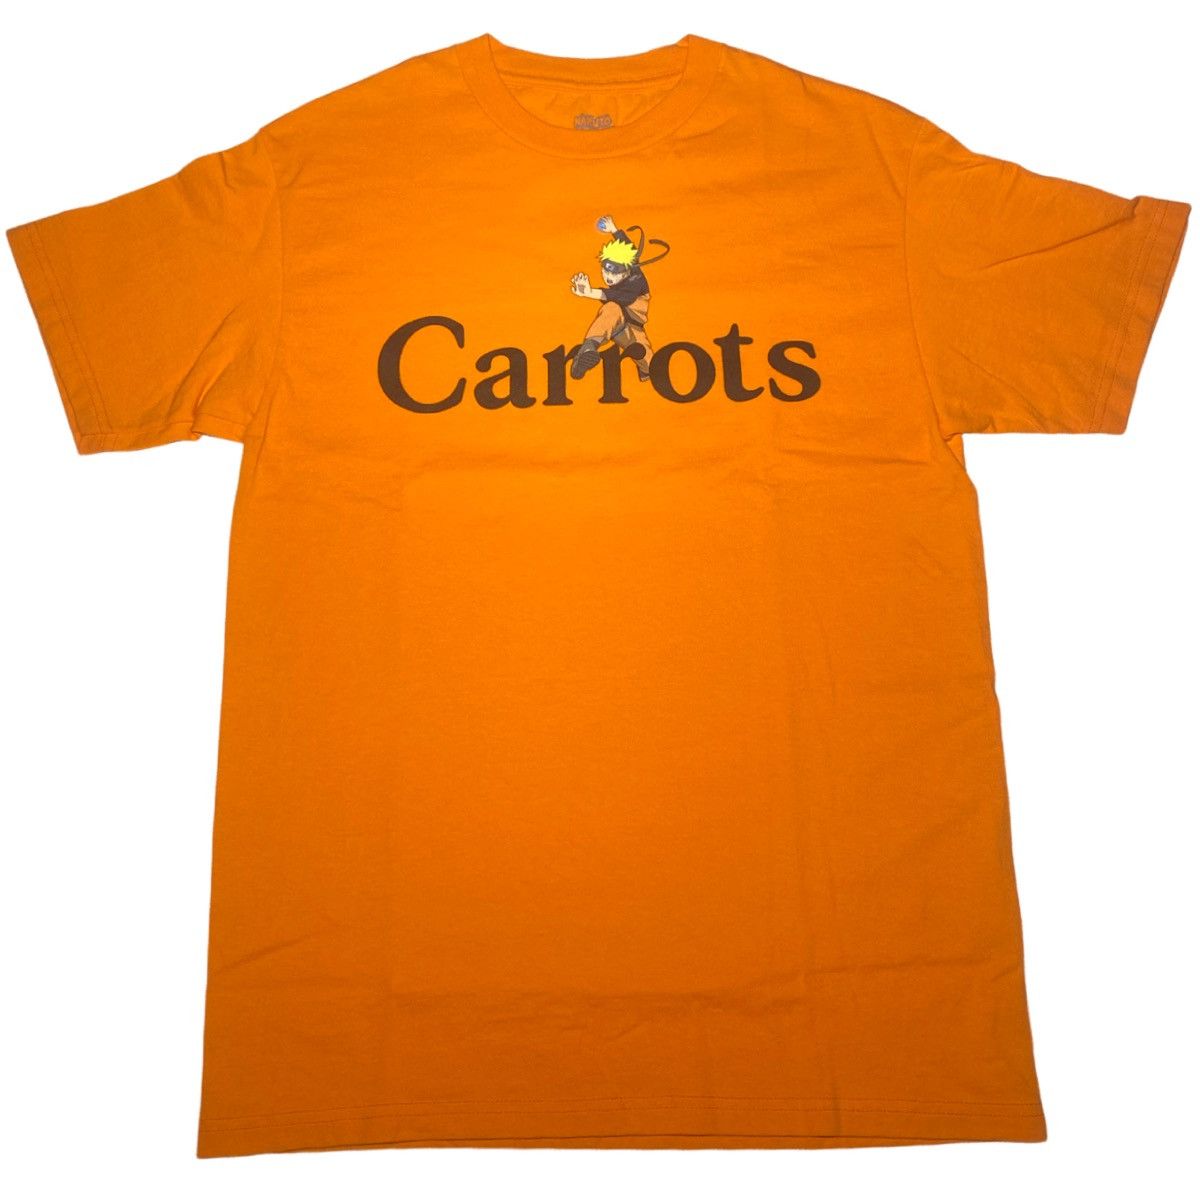 Carrots By Anwar Carrots x Naruto tee | Grailed